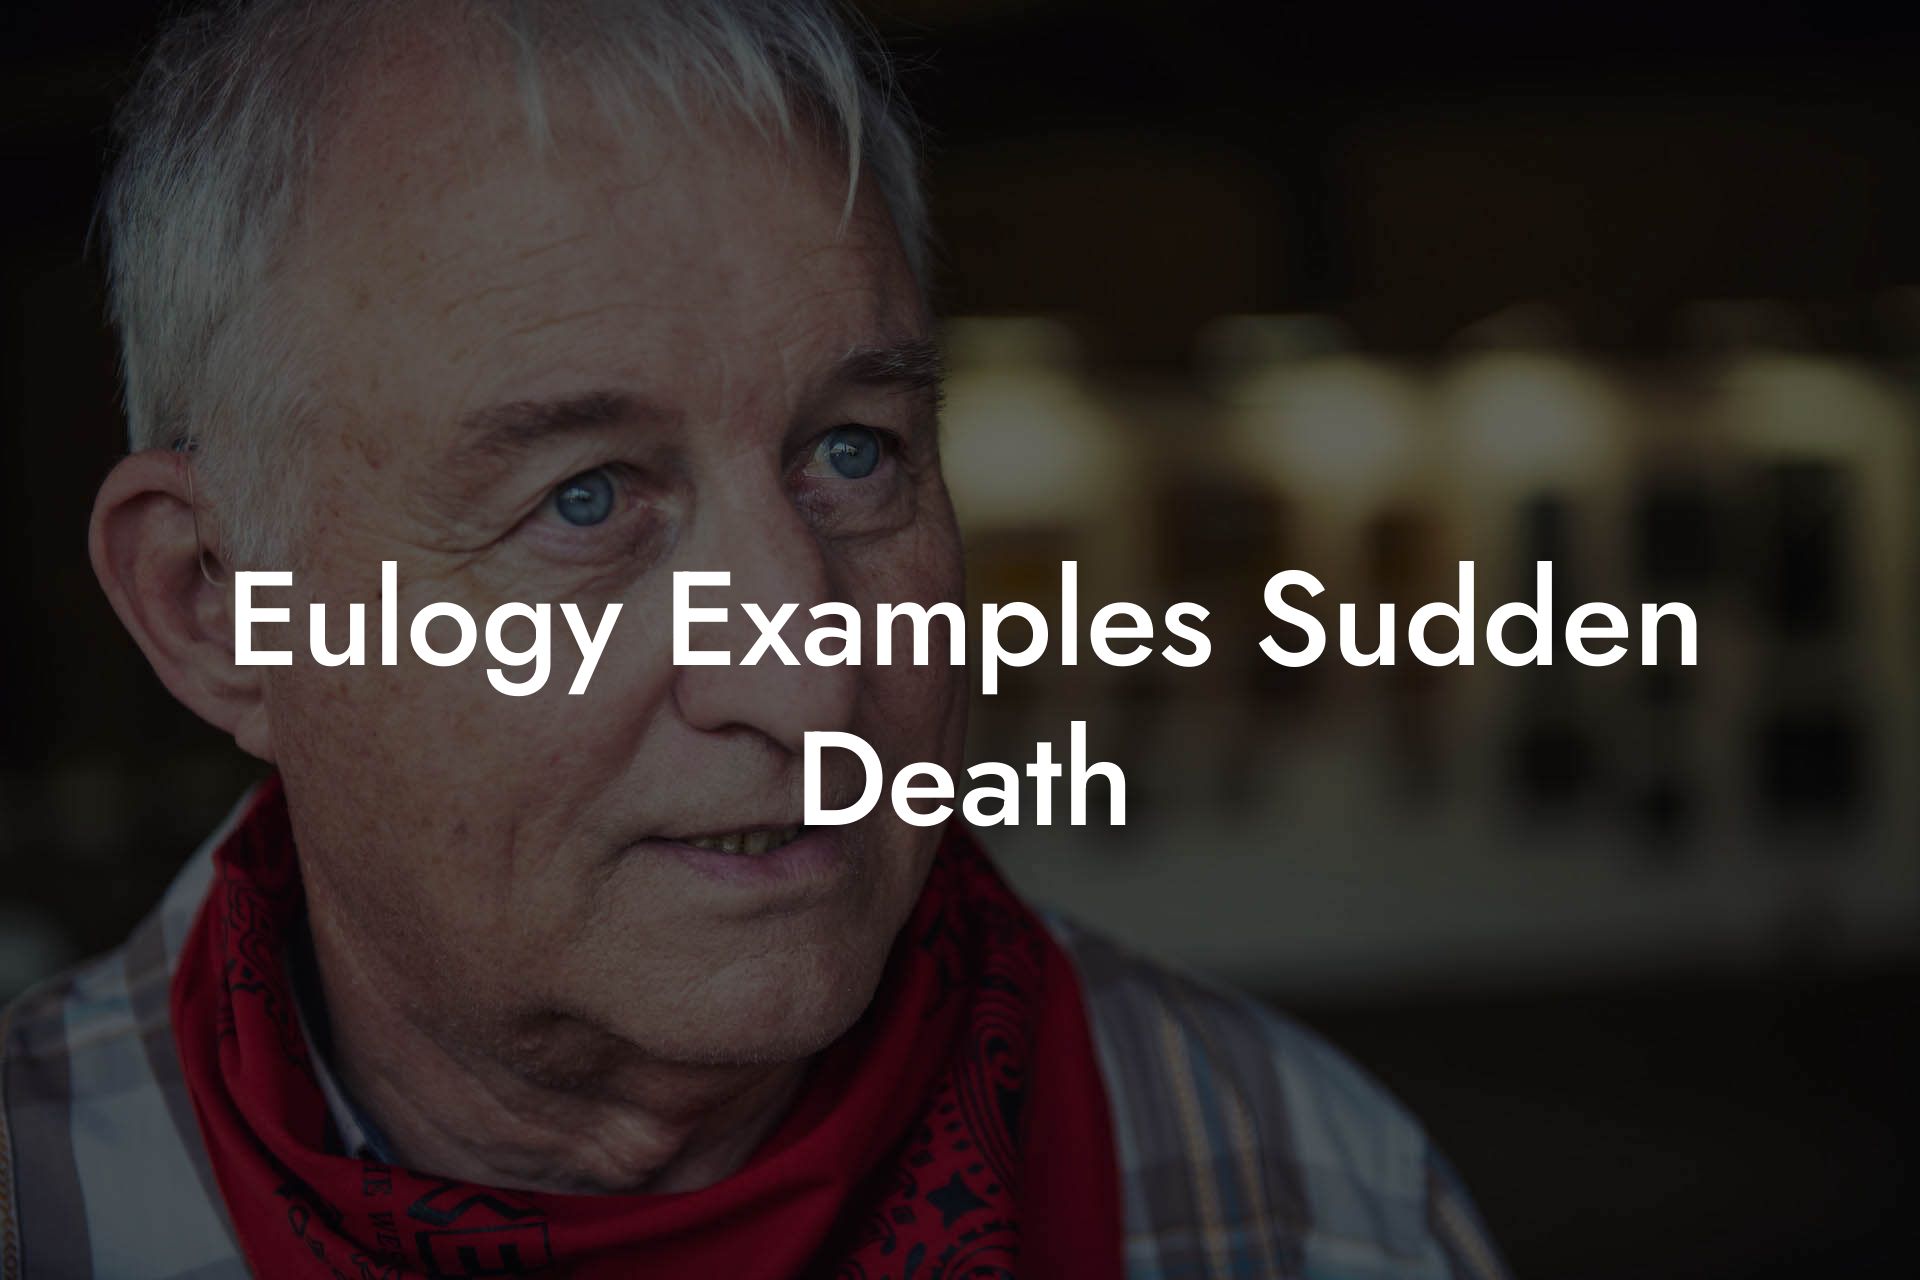 Eulogy Examples Sudden Death